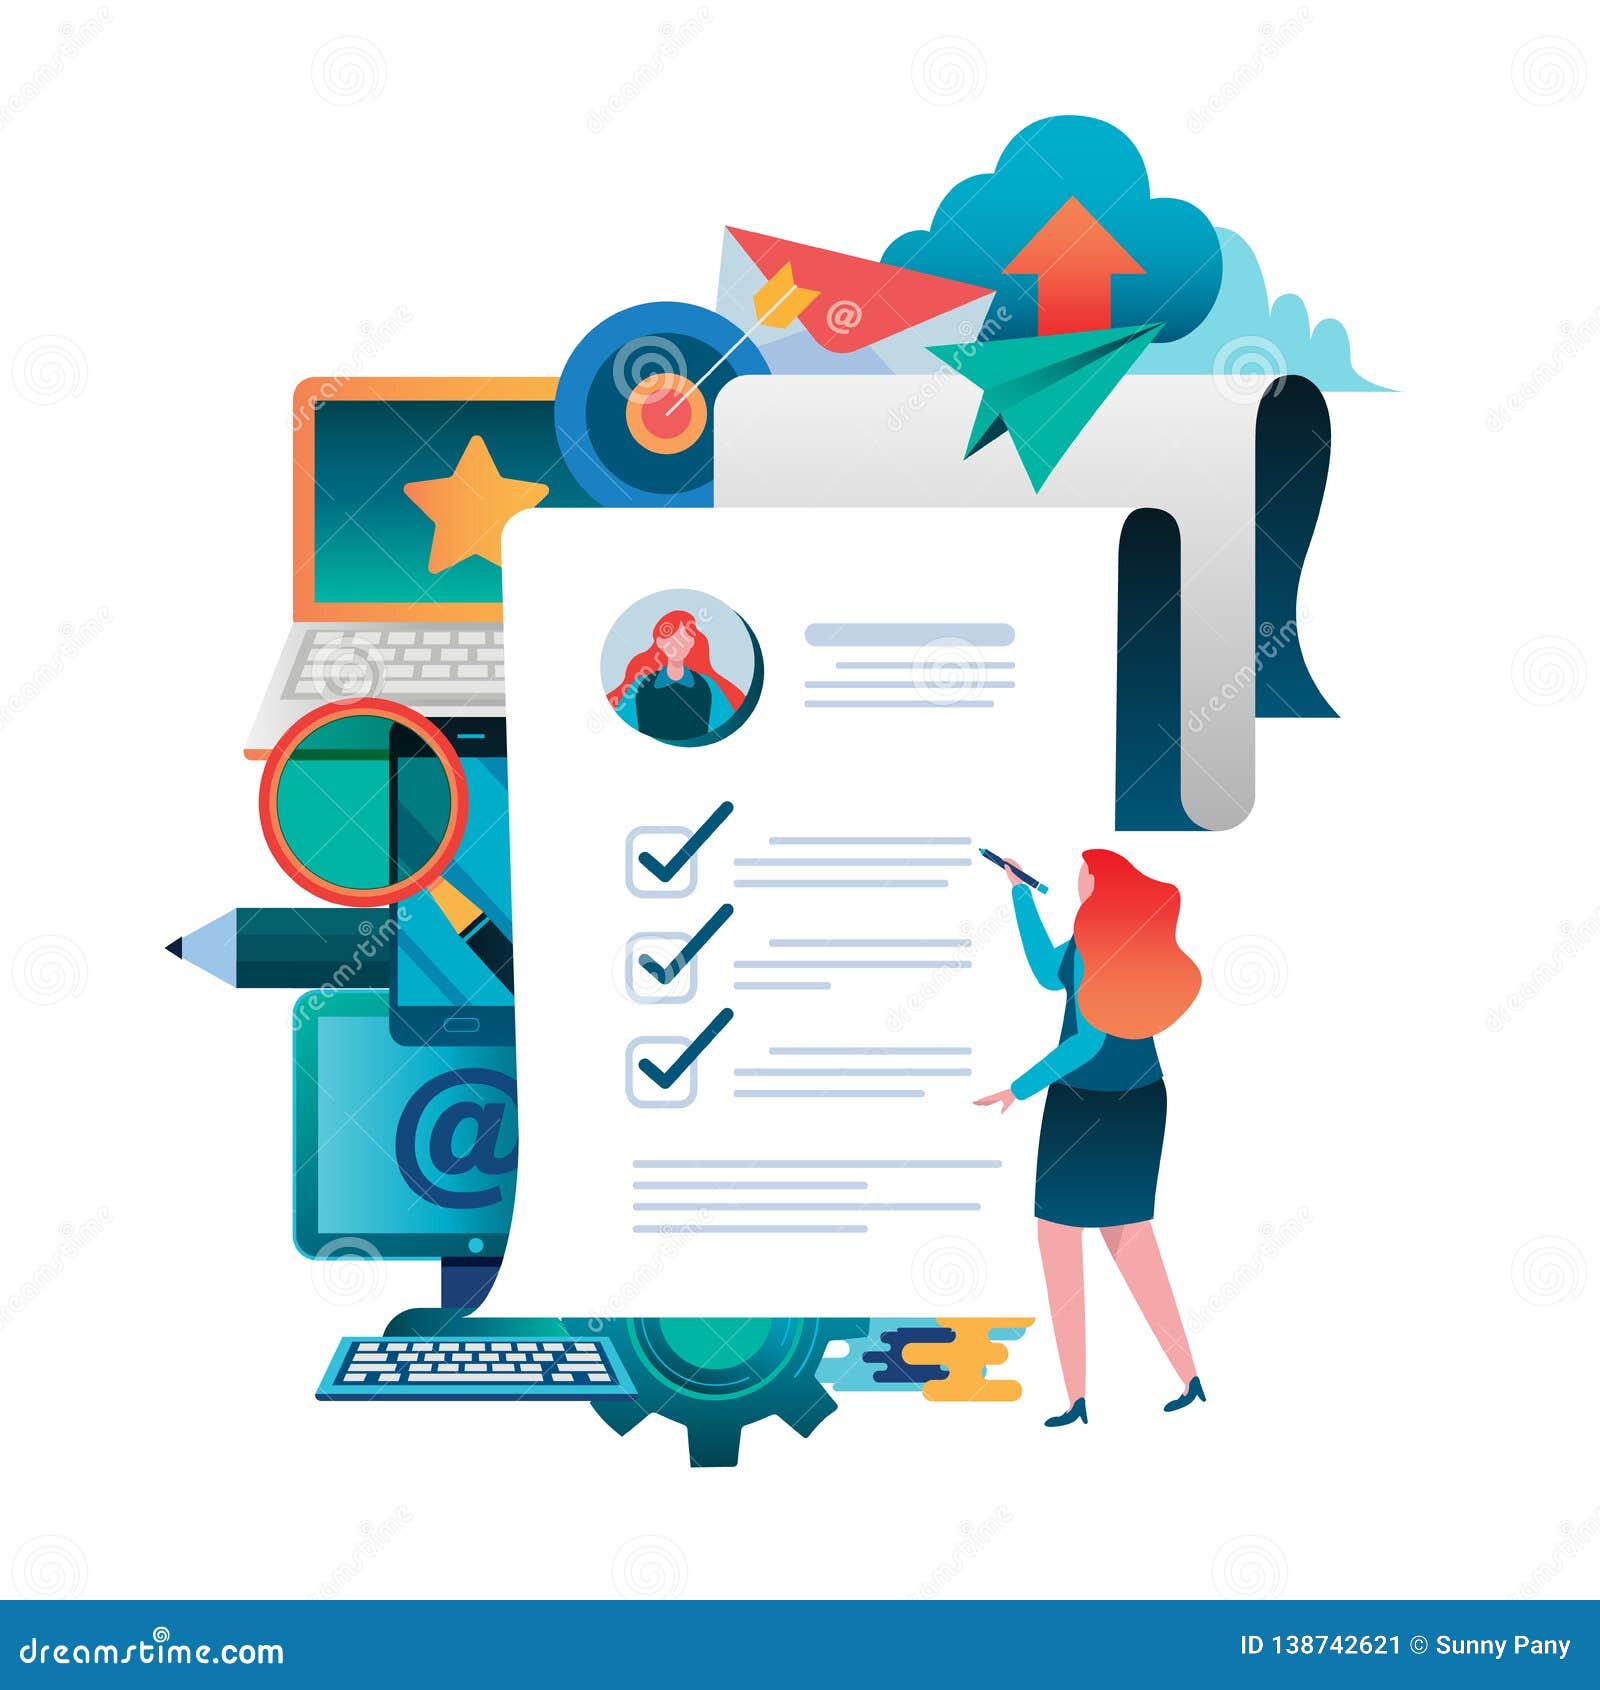 People Fill Out a Form. Online Application. Women Female Flat Cartoon  Character Graphic Design Stock Vector - Illustration of form, landing:  138742621